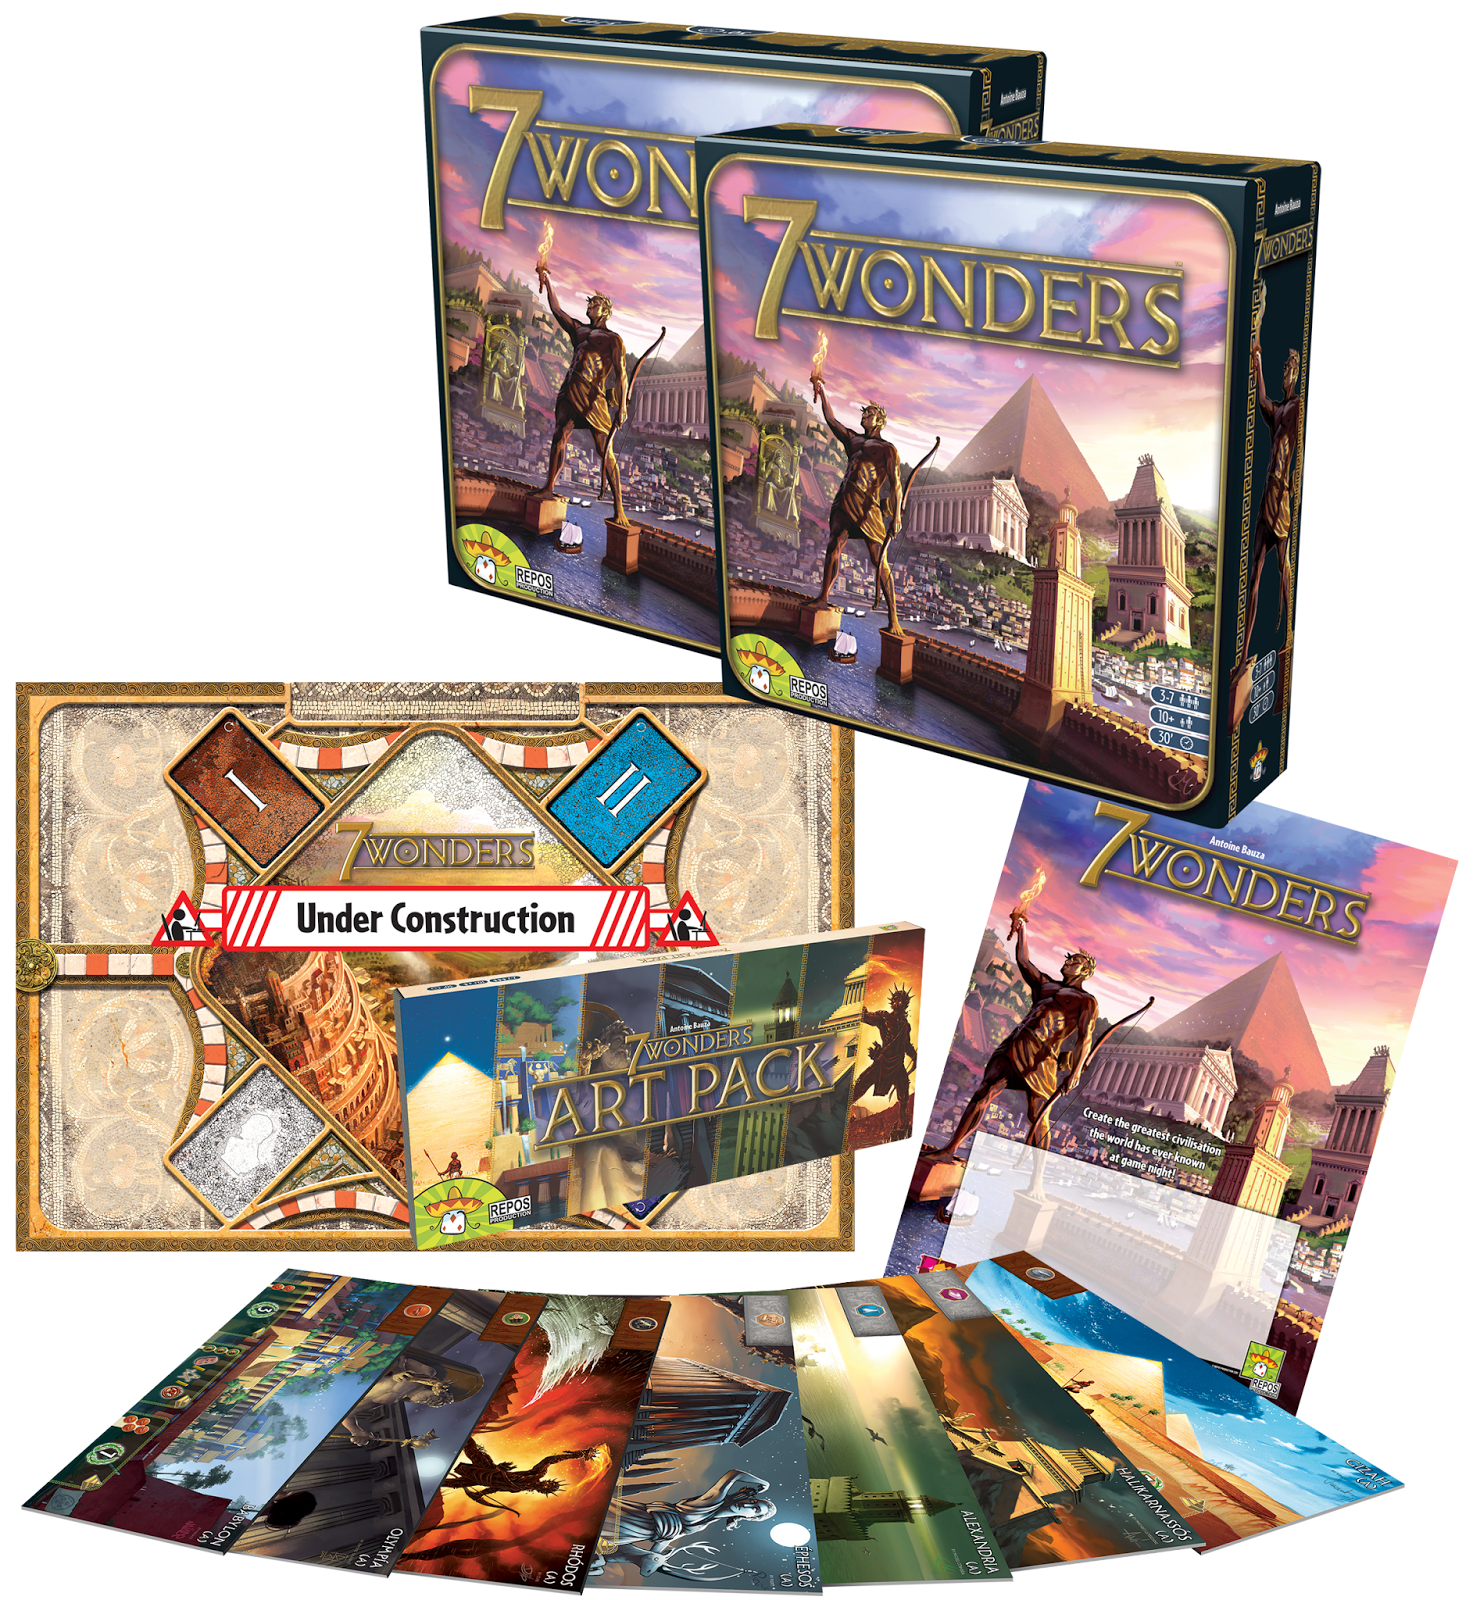 7 Wonders Promo Play Mat Seven Wonders NEW From Organized Play Kit